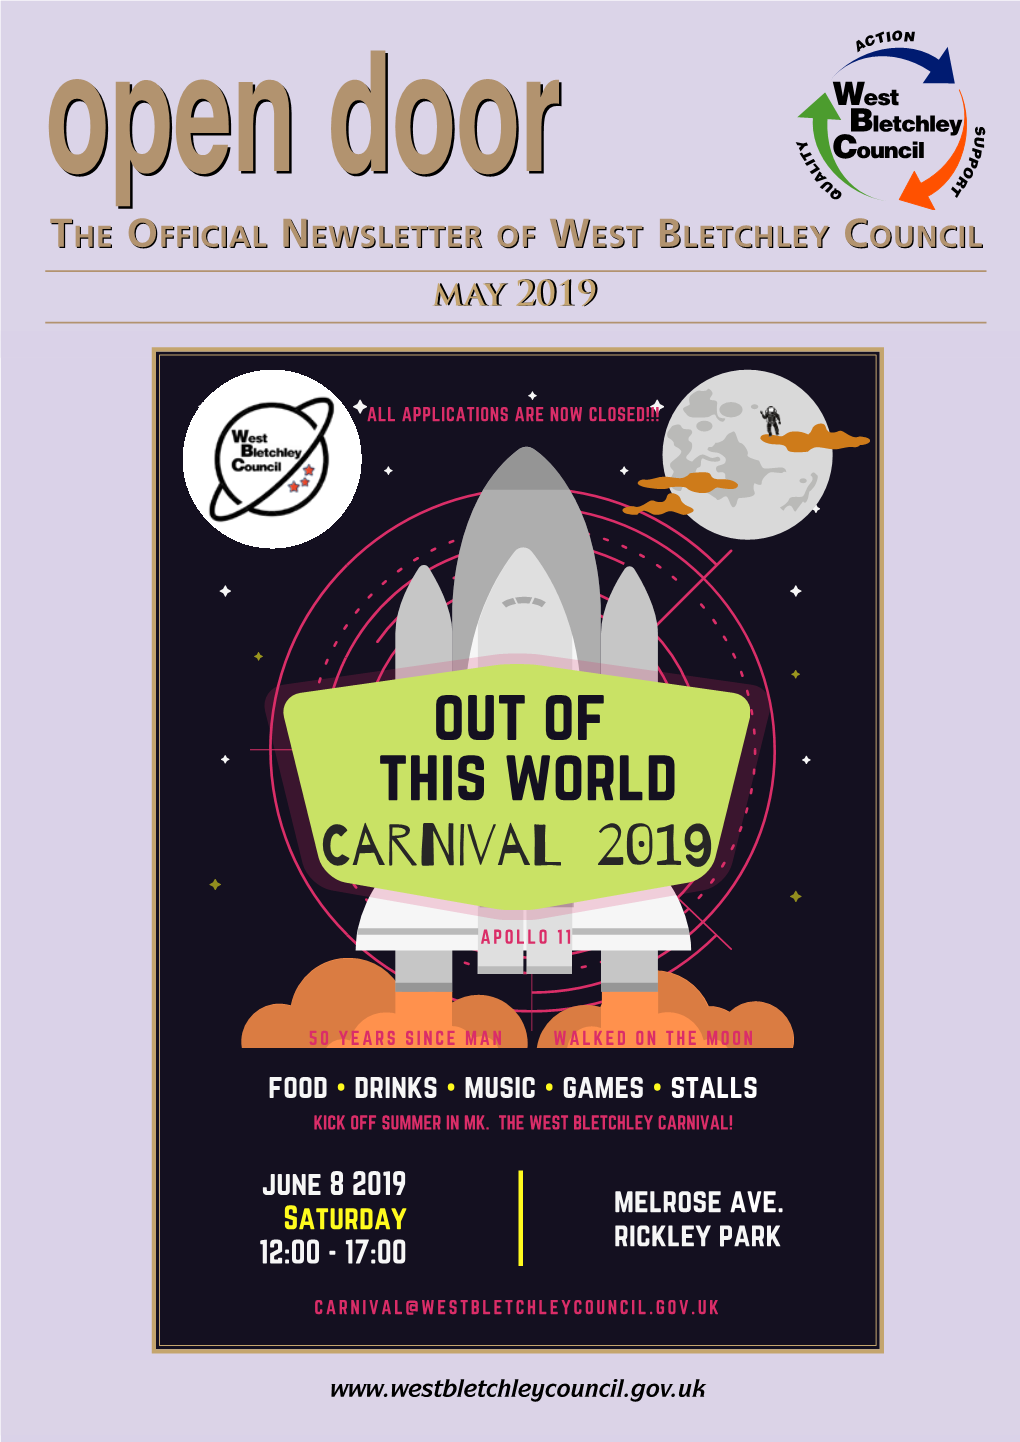 WEST BLETCHLEY COUNCIL Openhe FFICIAL Ewsletterdoor of EST LETCHLEY OUNCIL the OFFICIAL NEWSLETTER of WEST BLETCHLEY COUNCIL Maymay 20192019